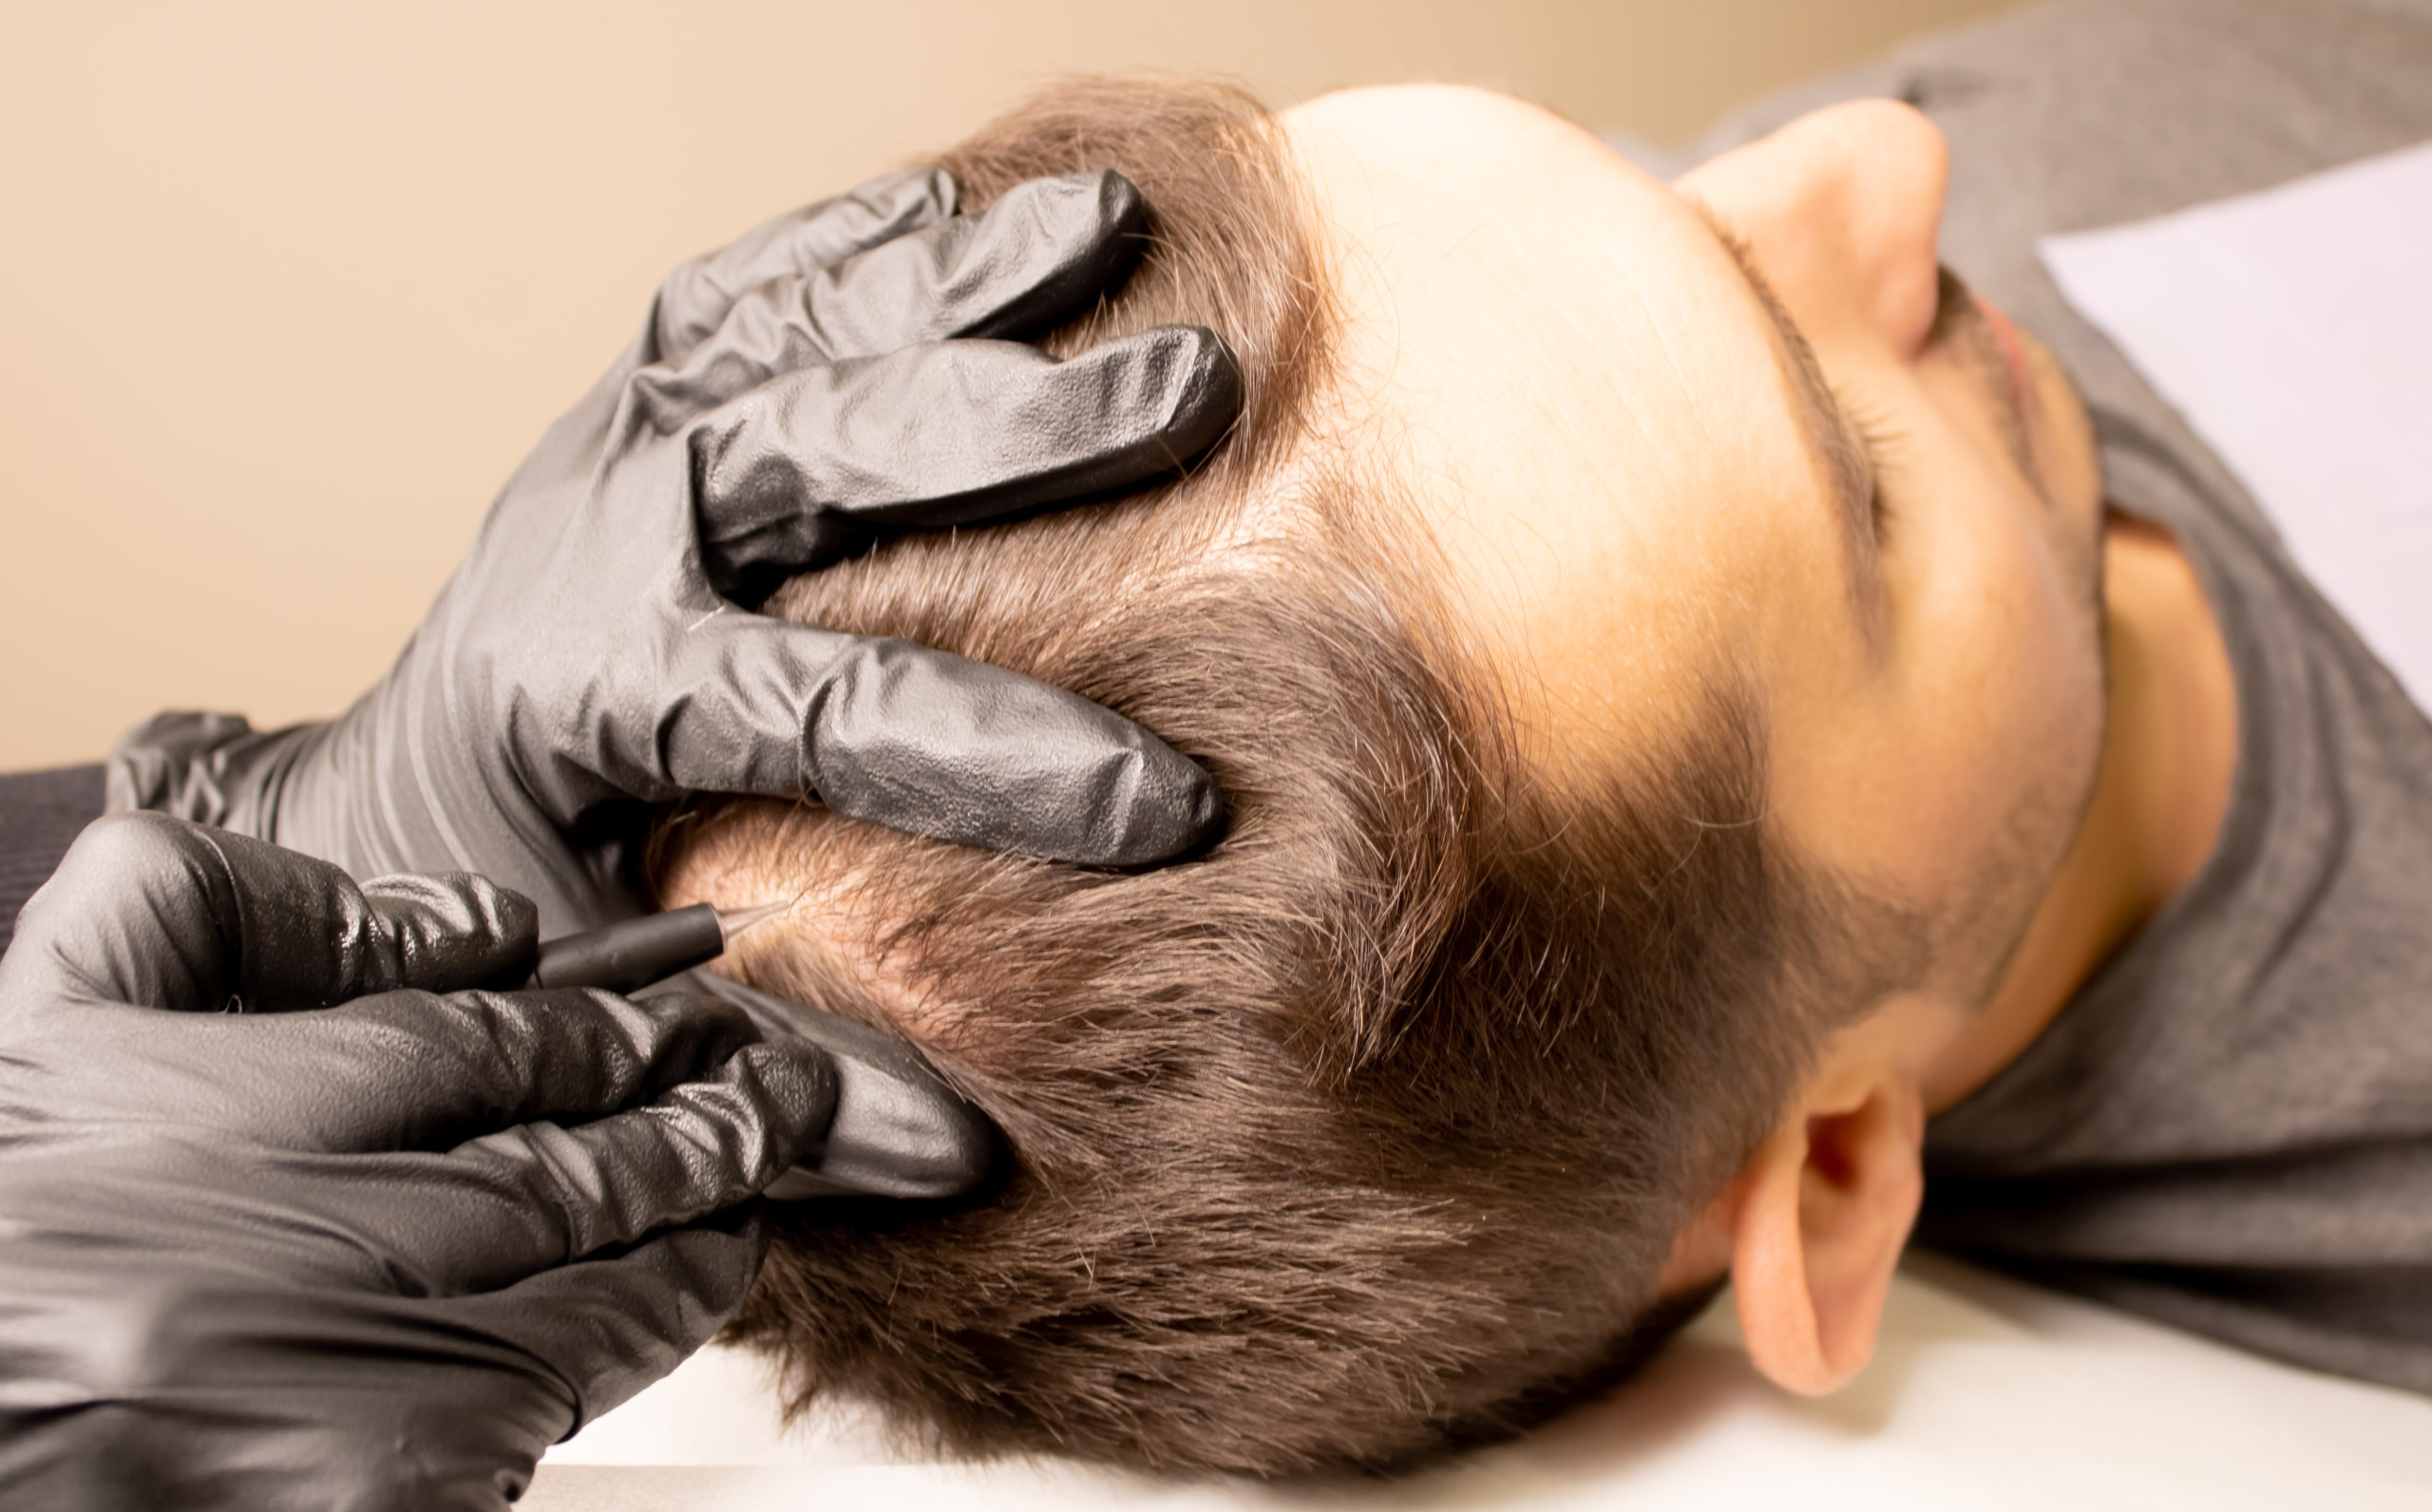 A Man getting Hair restoration | Northwest Beauty and Wellness at Sequim, WA